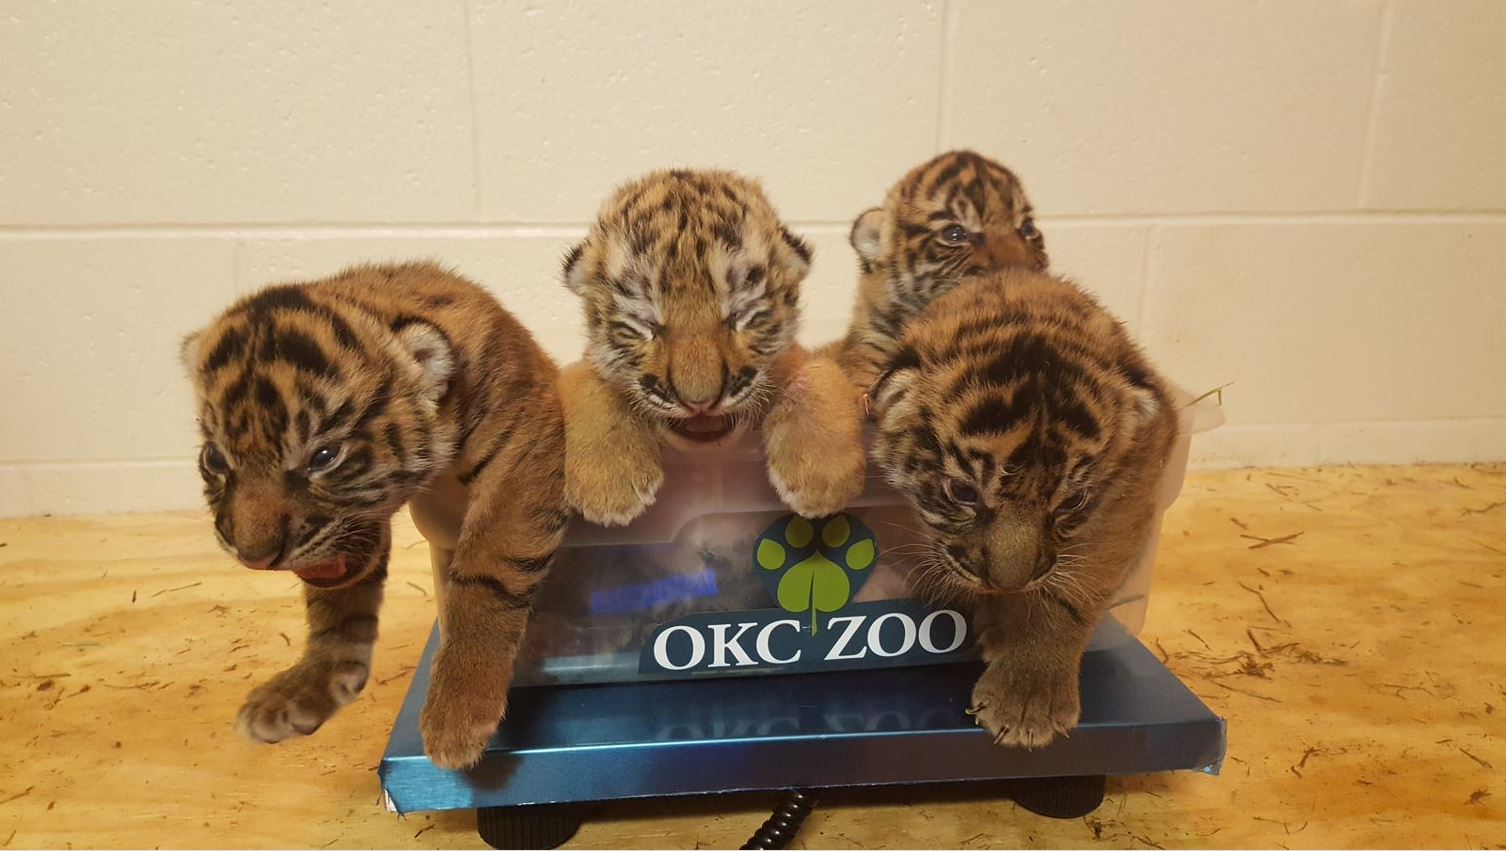 Oklahoma City Zoo launches webcam to show adopted tiger cub